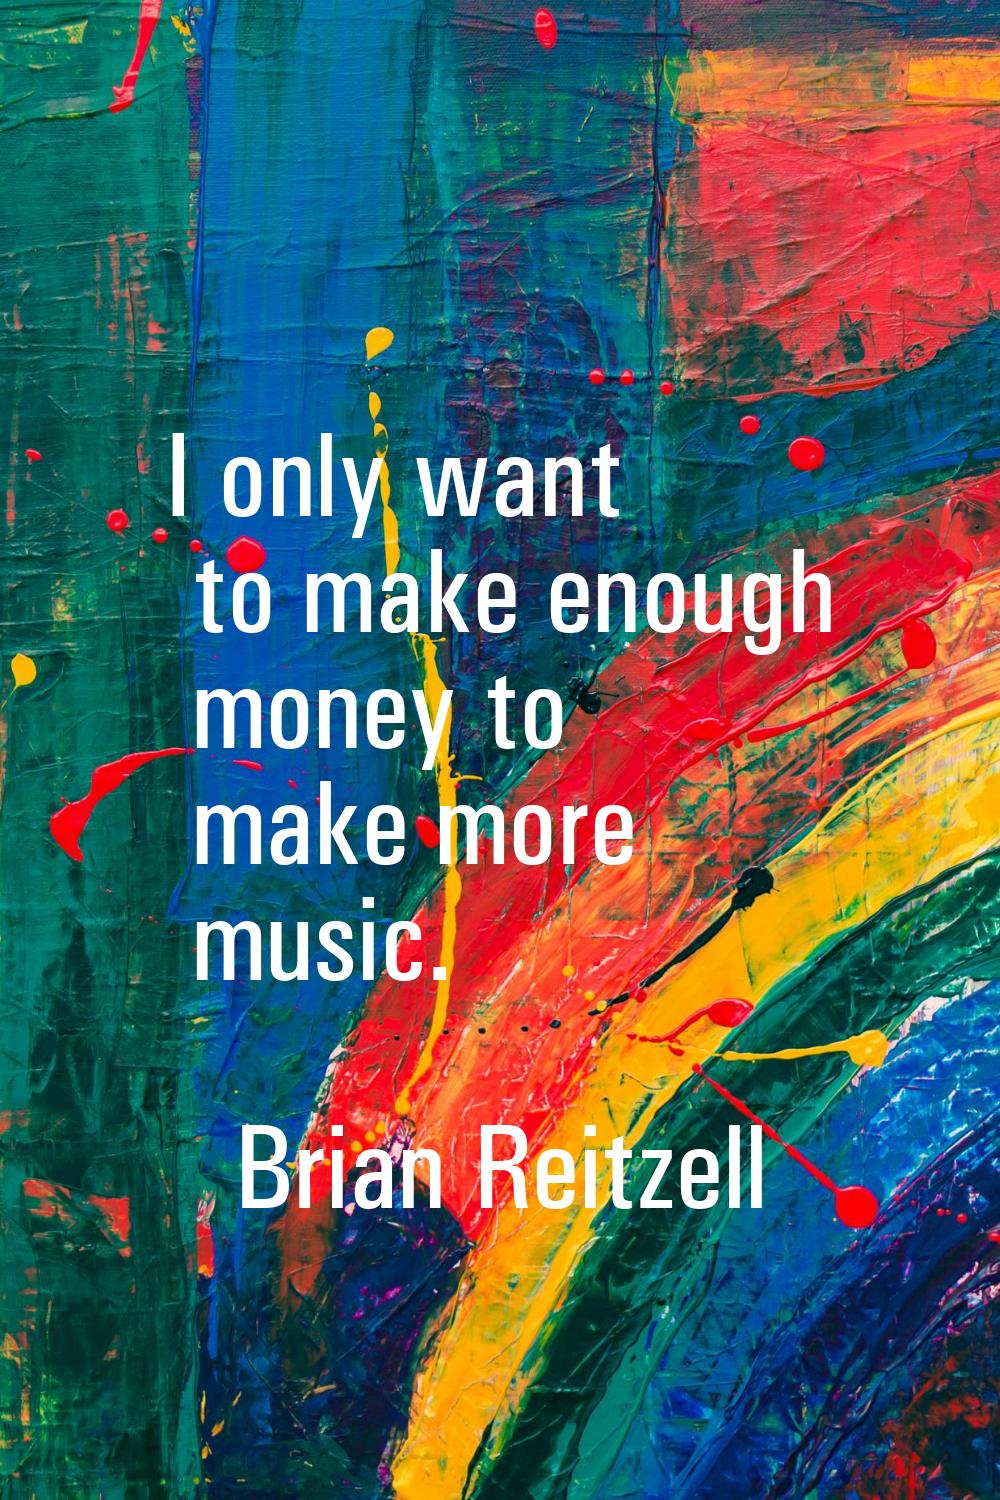 I only want to make enough money to make more music.